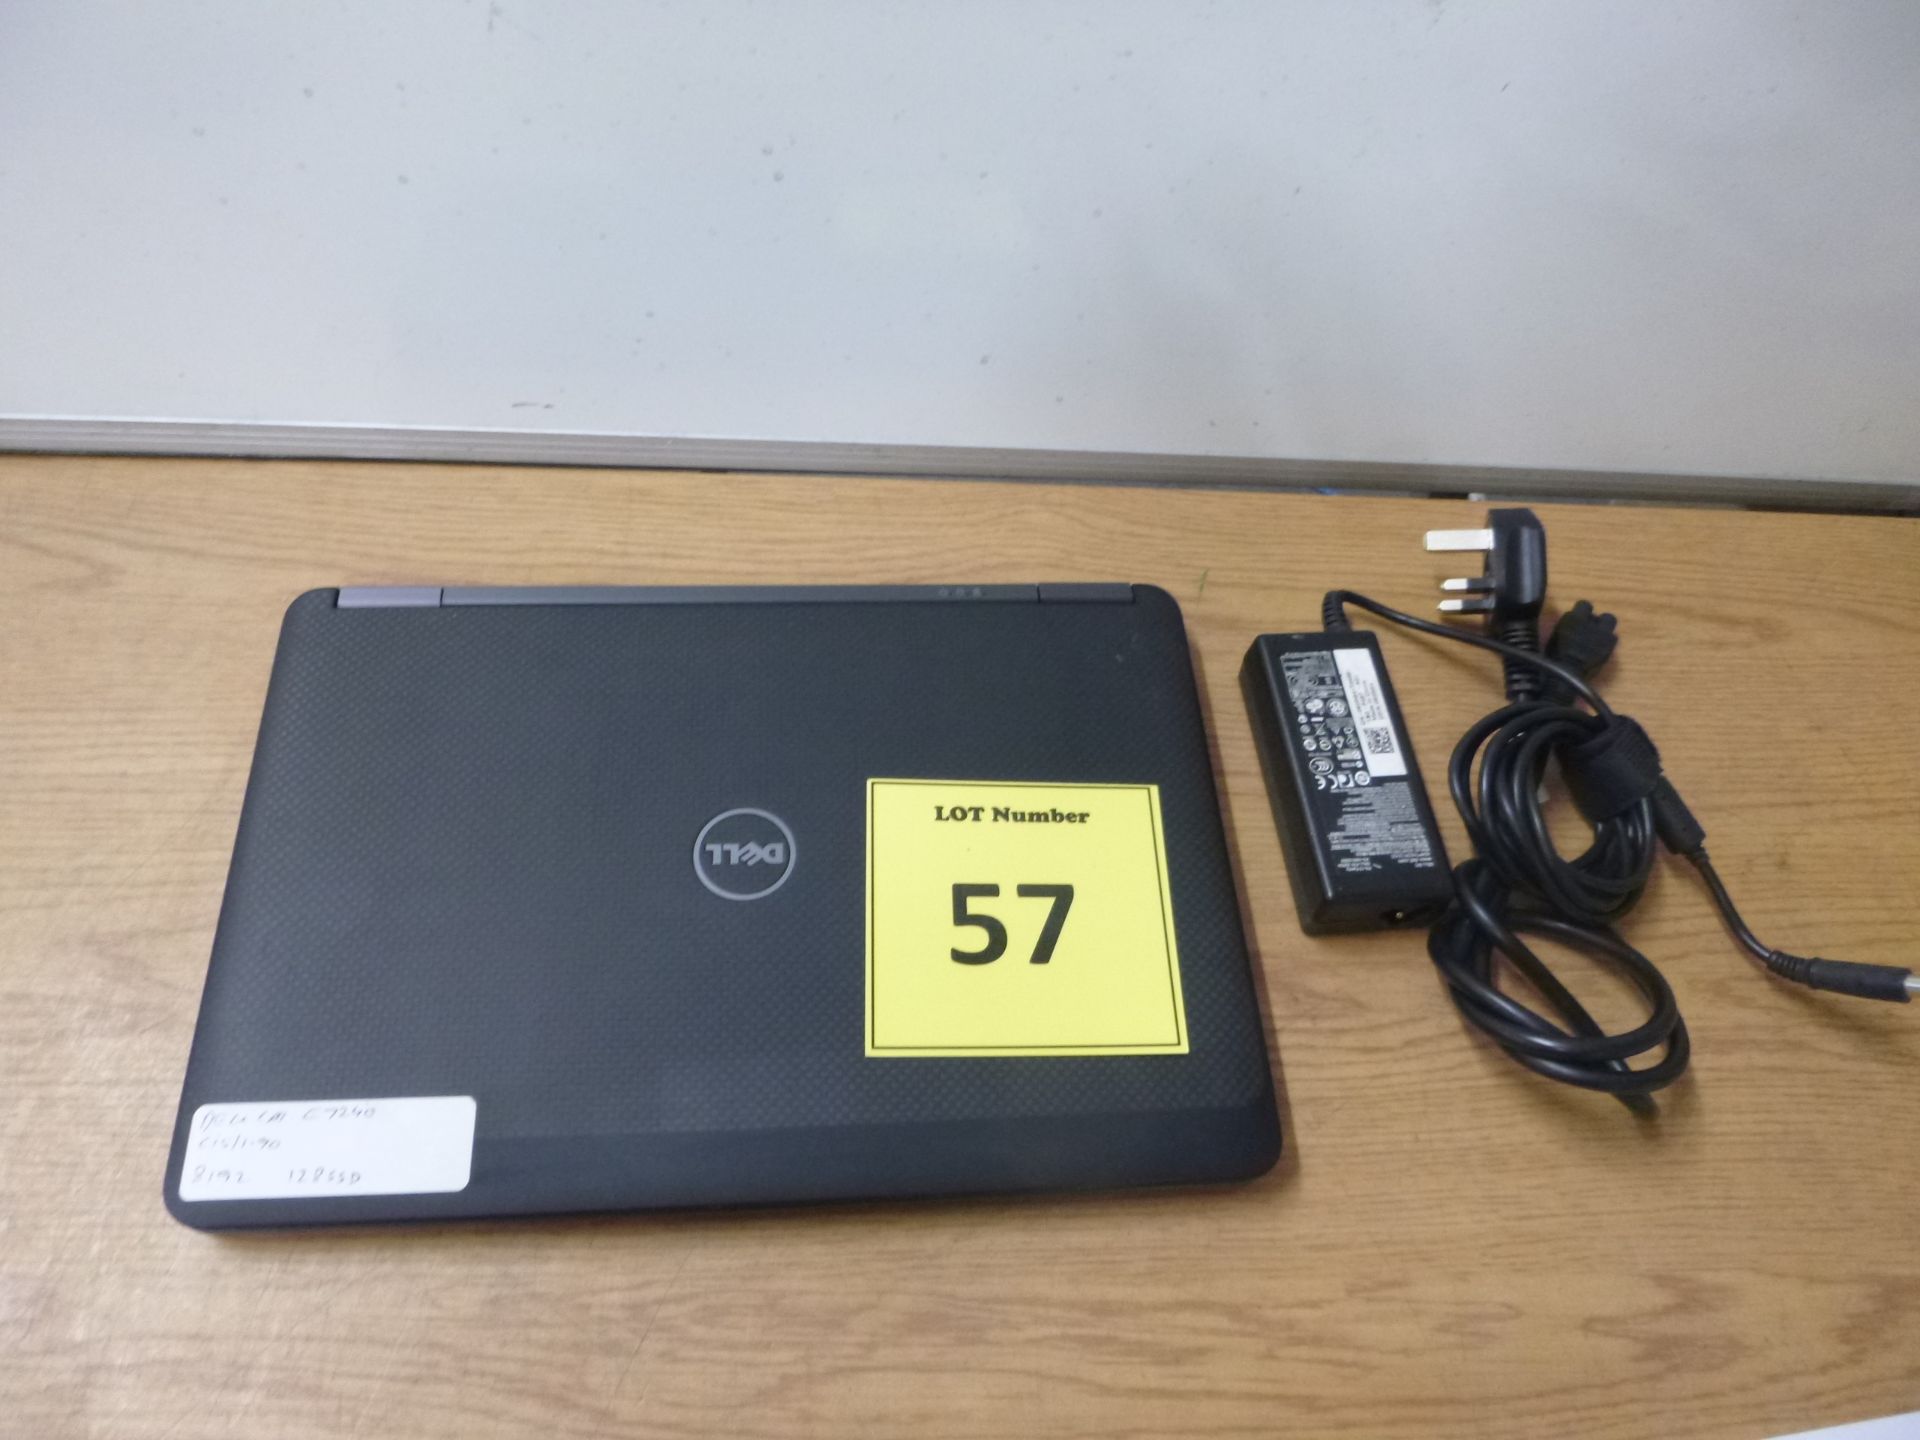 DELL LATITUDE E7240 LAPTOP. CORE i5 1.9 GHZ PROCESSOR, 8GB RAM, 128GB SOLID STATE HDD. WITH PSU & W8 - Image 2 of 2